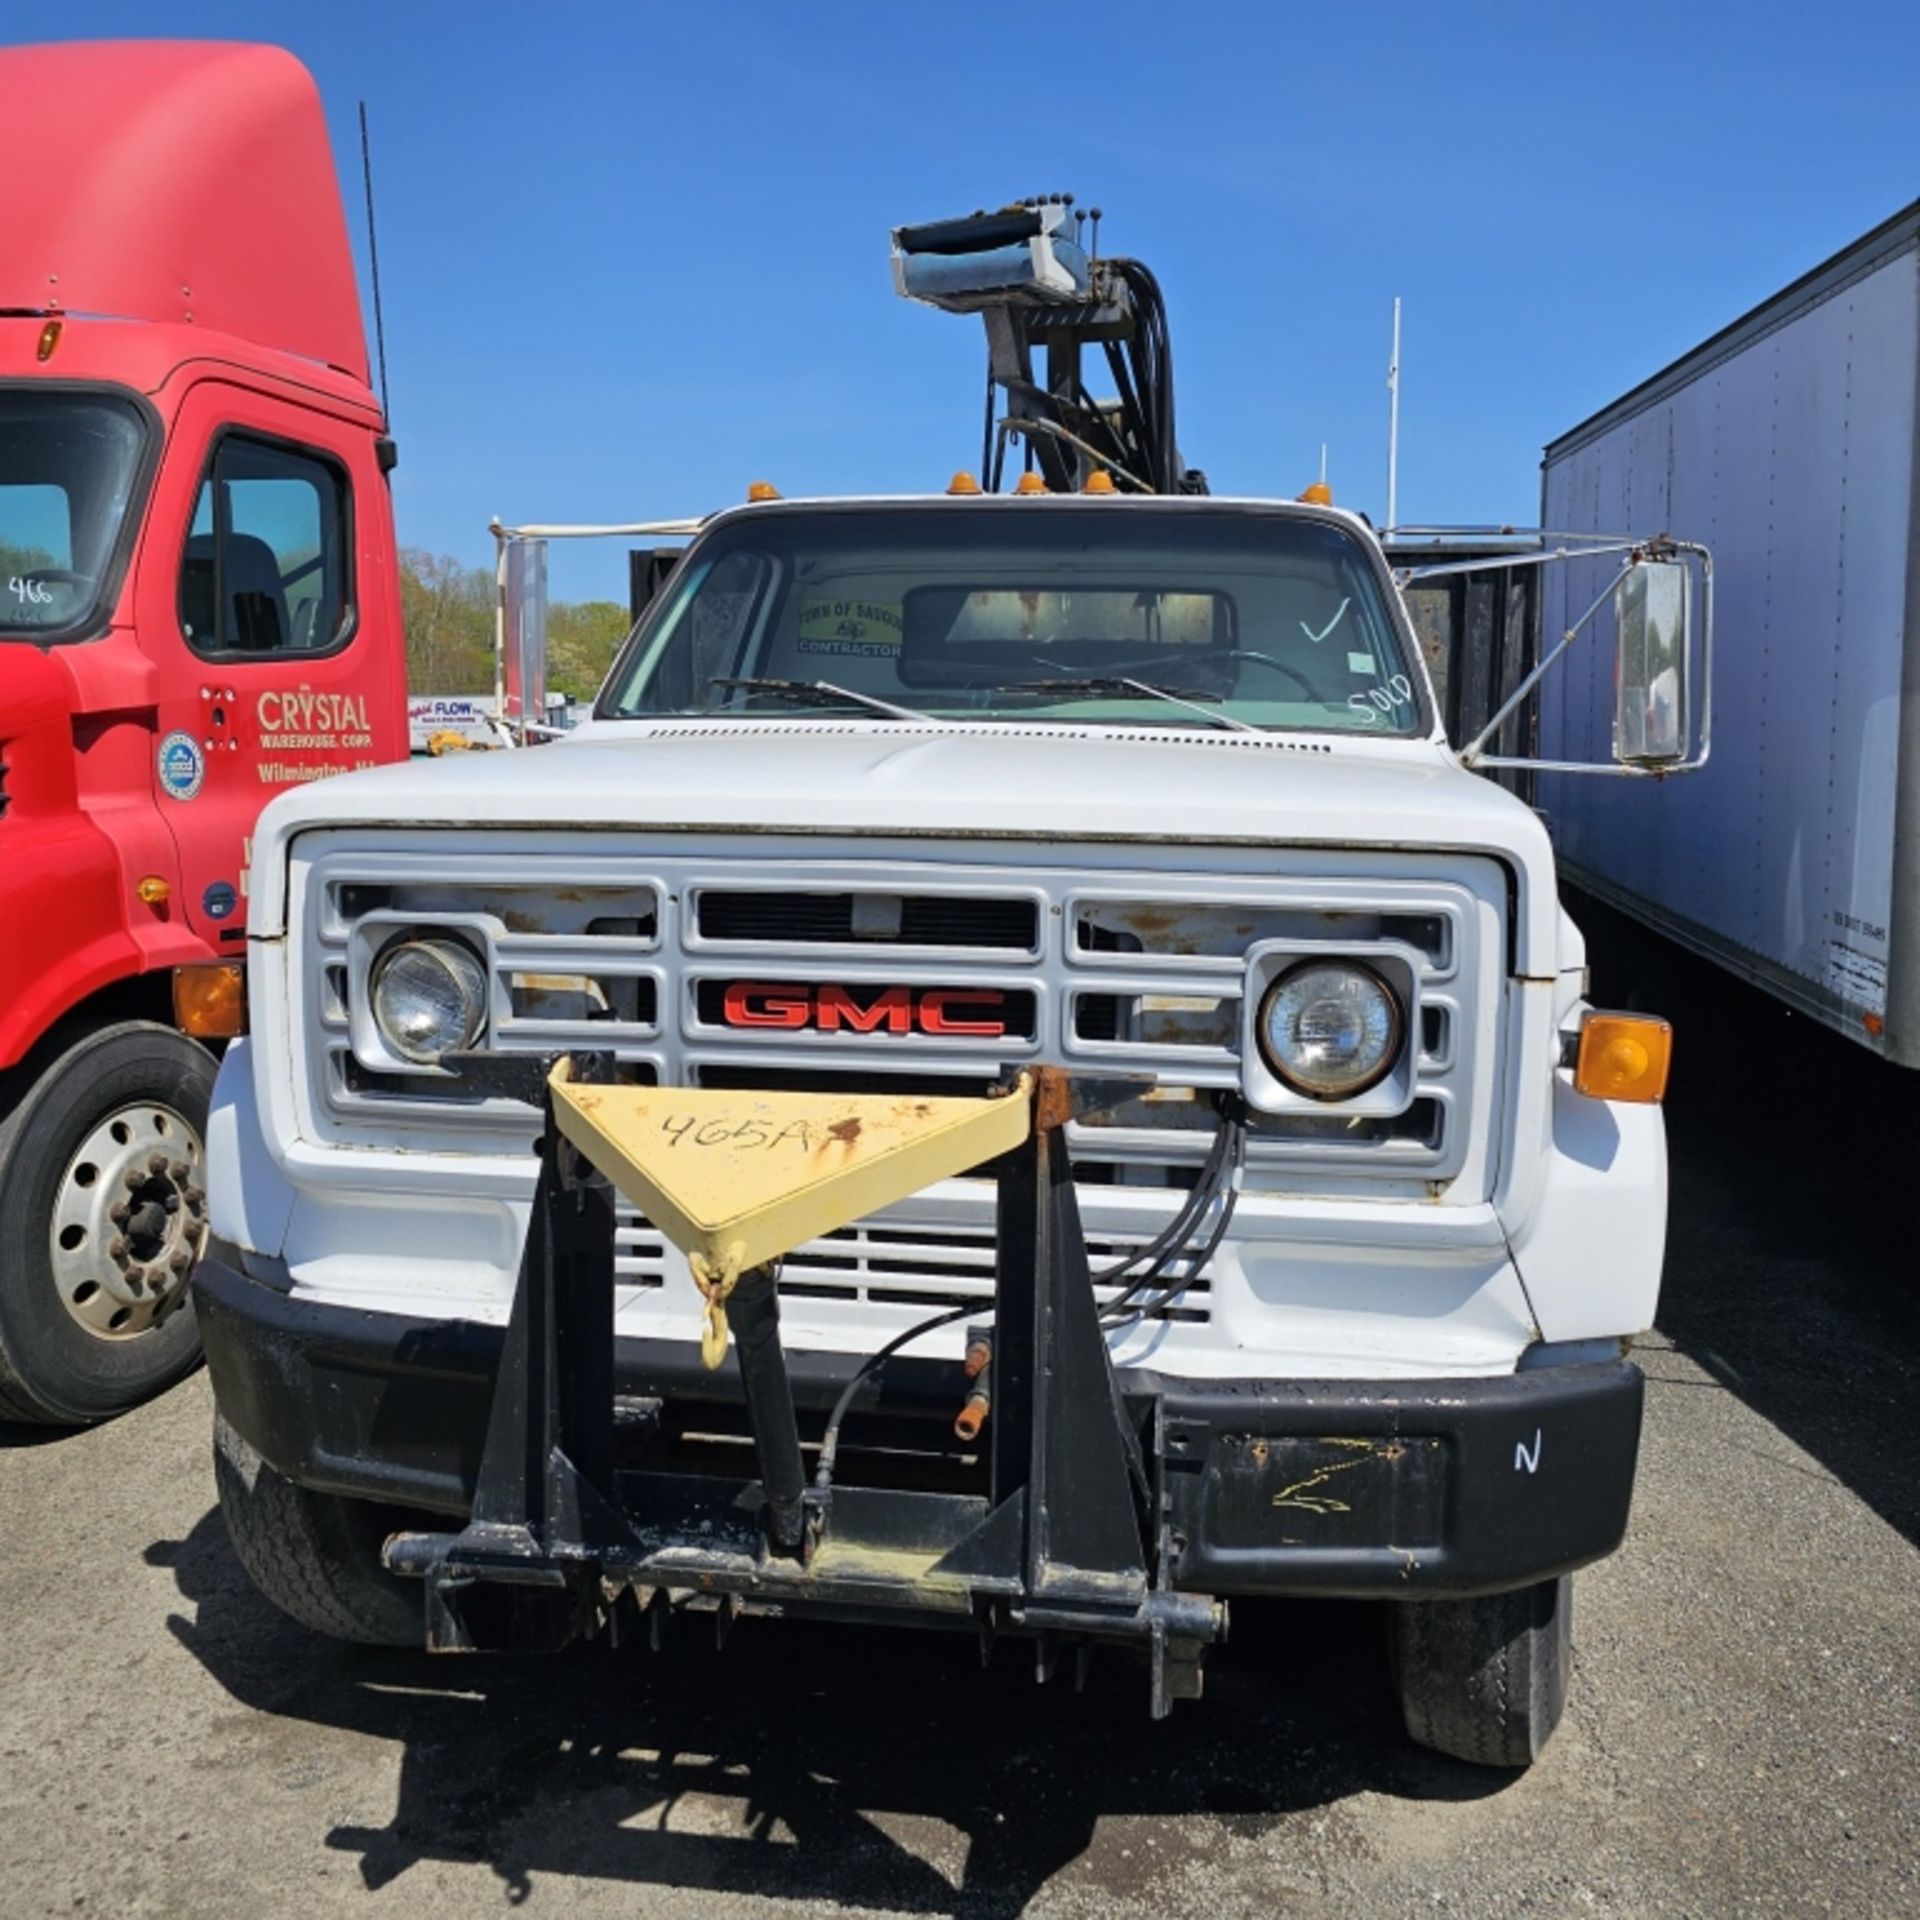 1988 Gmc Flatbed With Loader - Image 3 of 7